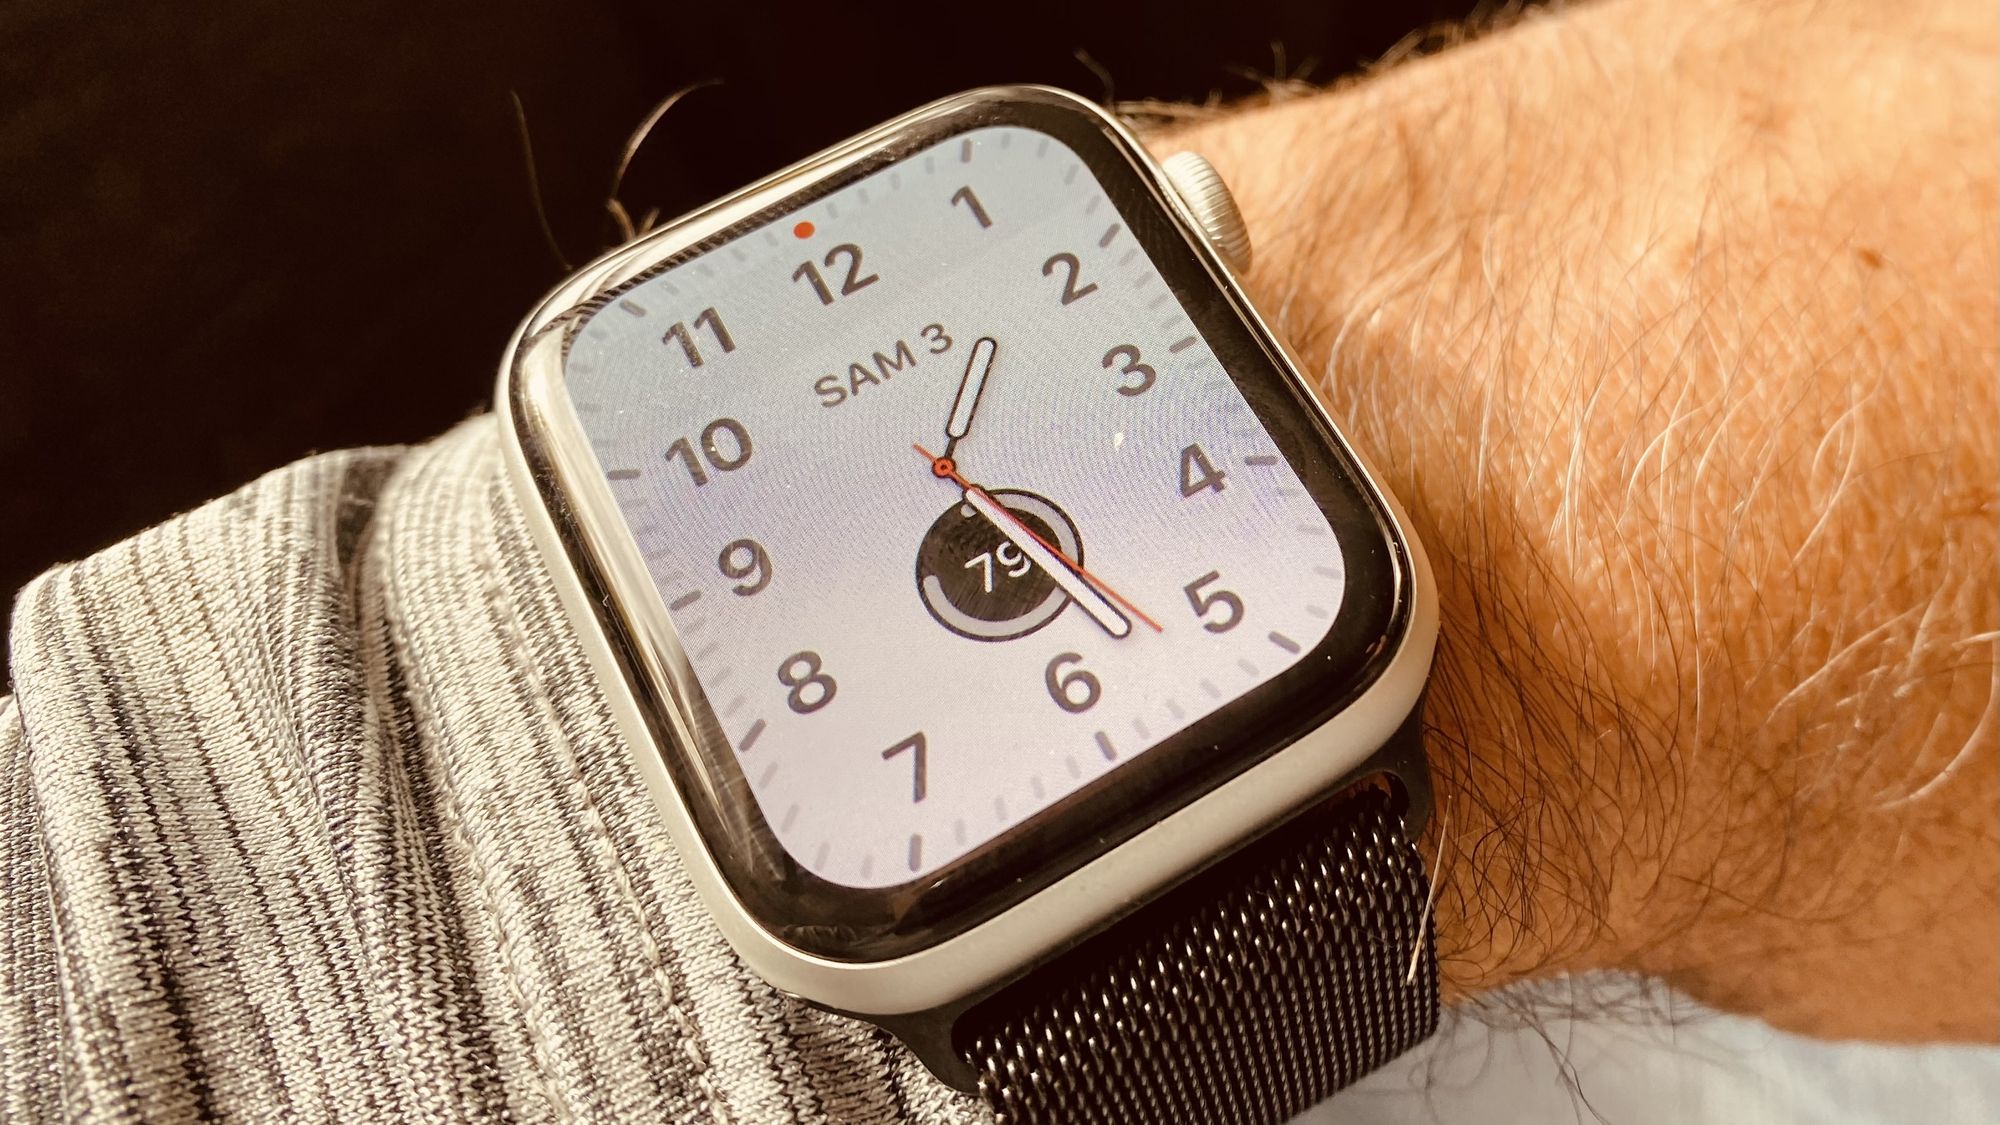 Upgrading from an Apple Watch Series 4 to Series 6